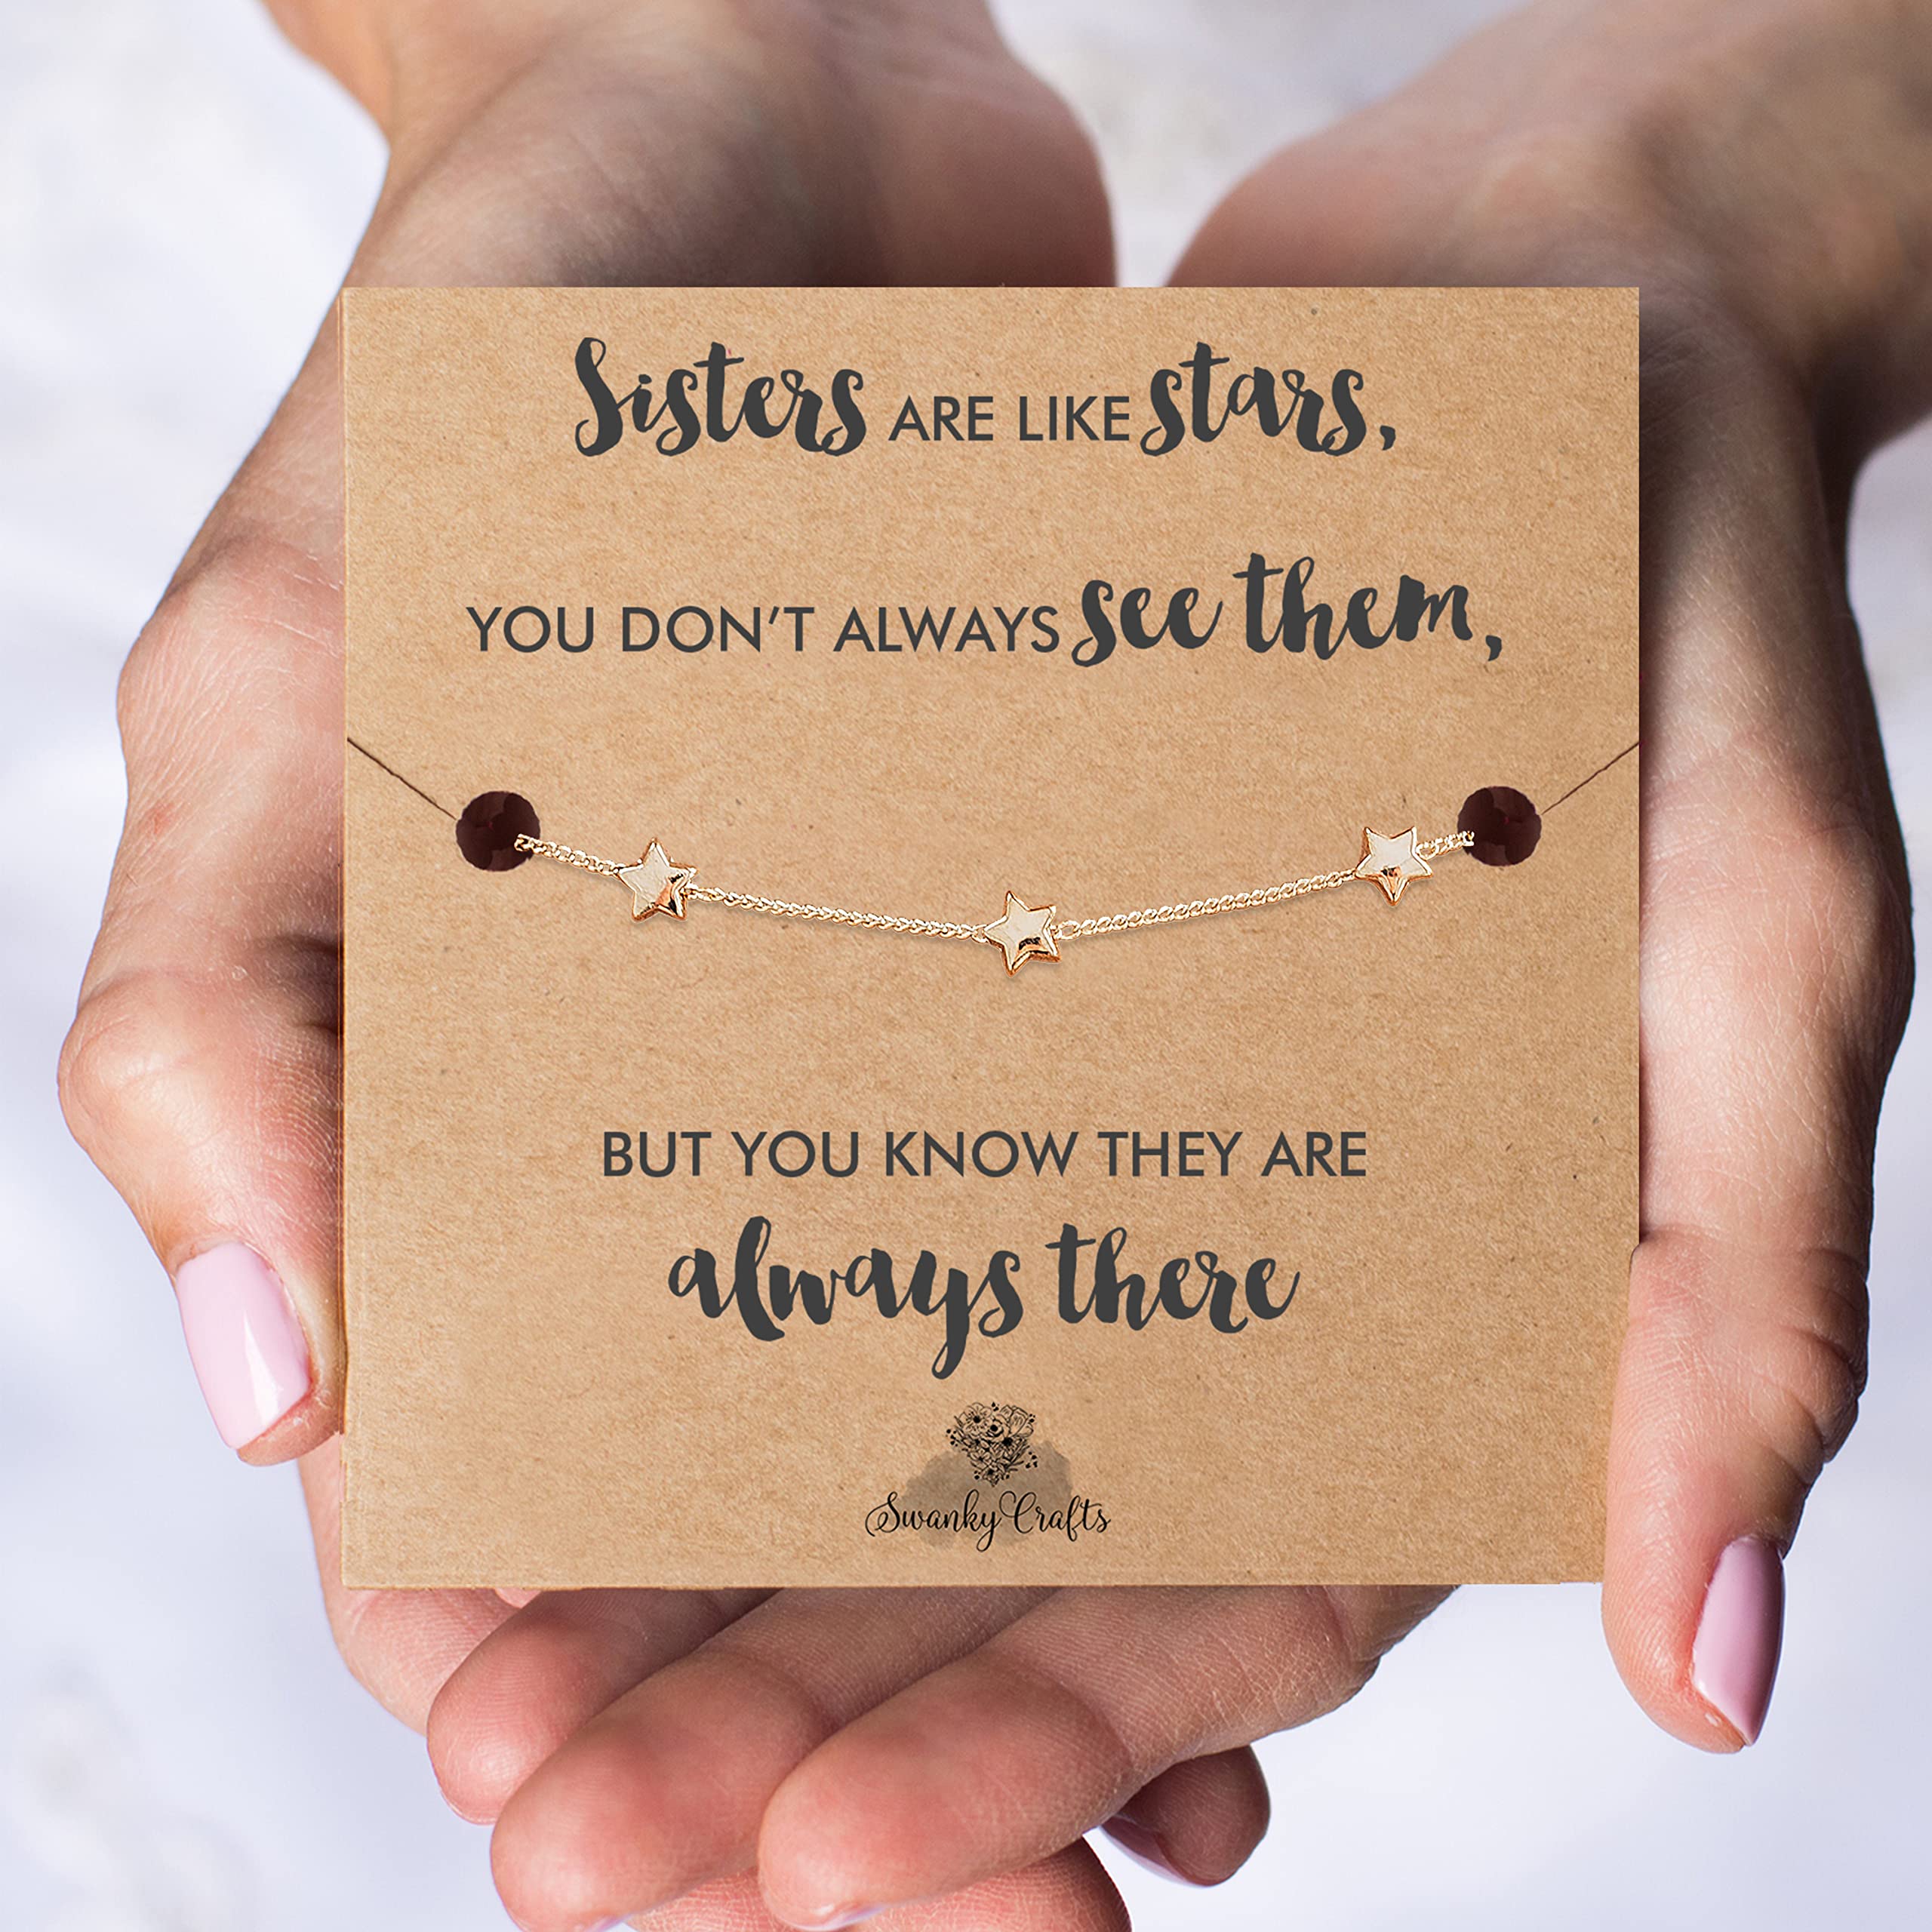 Sisters Gifts from Sister bracelets - Presents for sister Gift for Sister Birthday Gifts from Sister gifts from sisters gifts for sister from brother and sister gifts Gift for Sisters from sister - Golden Star sister Bracelet with Cute Card